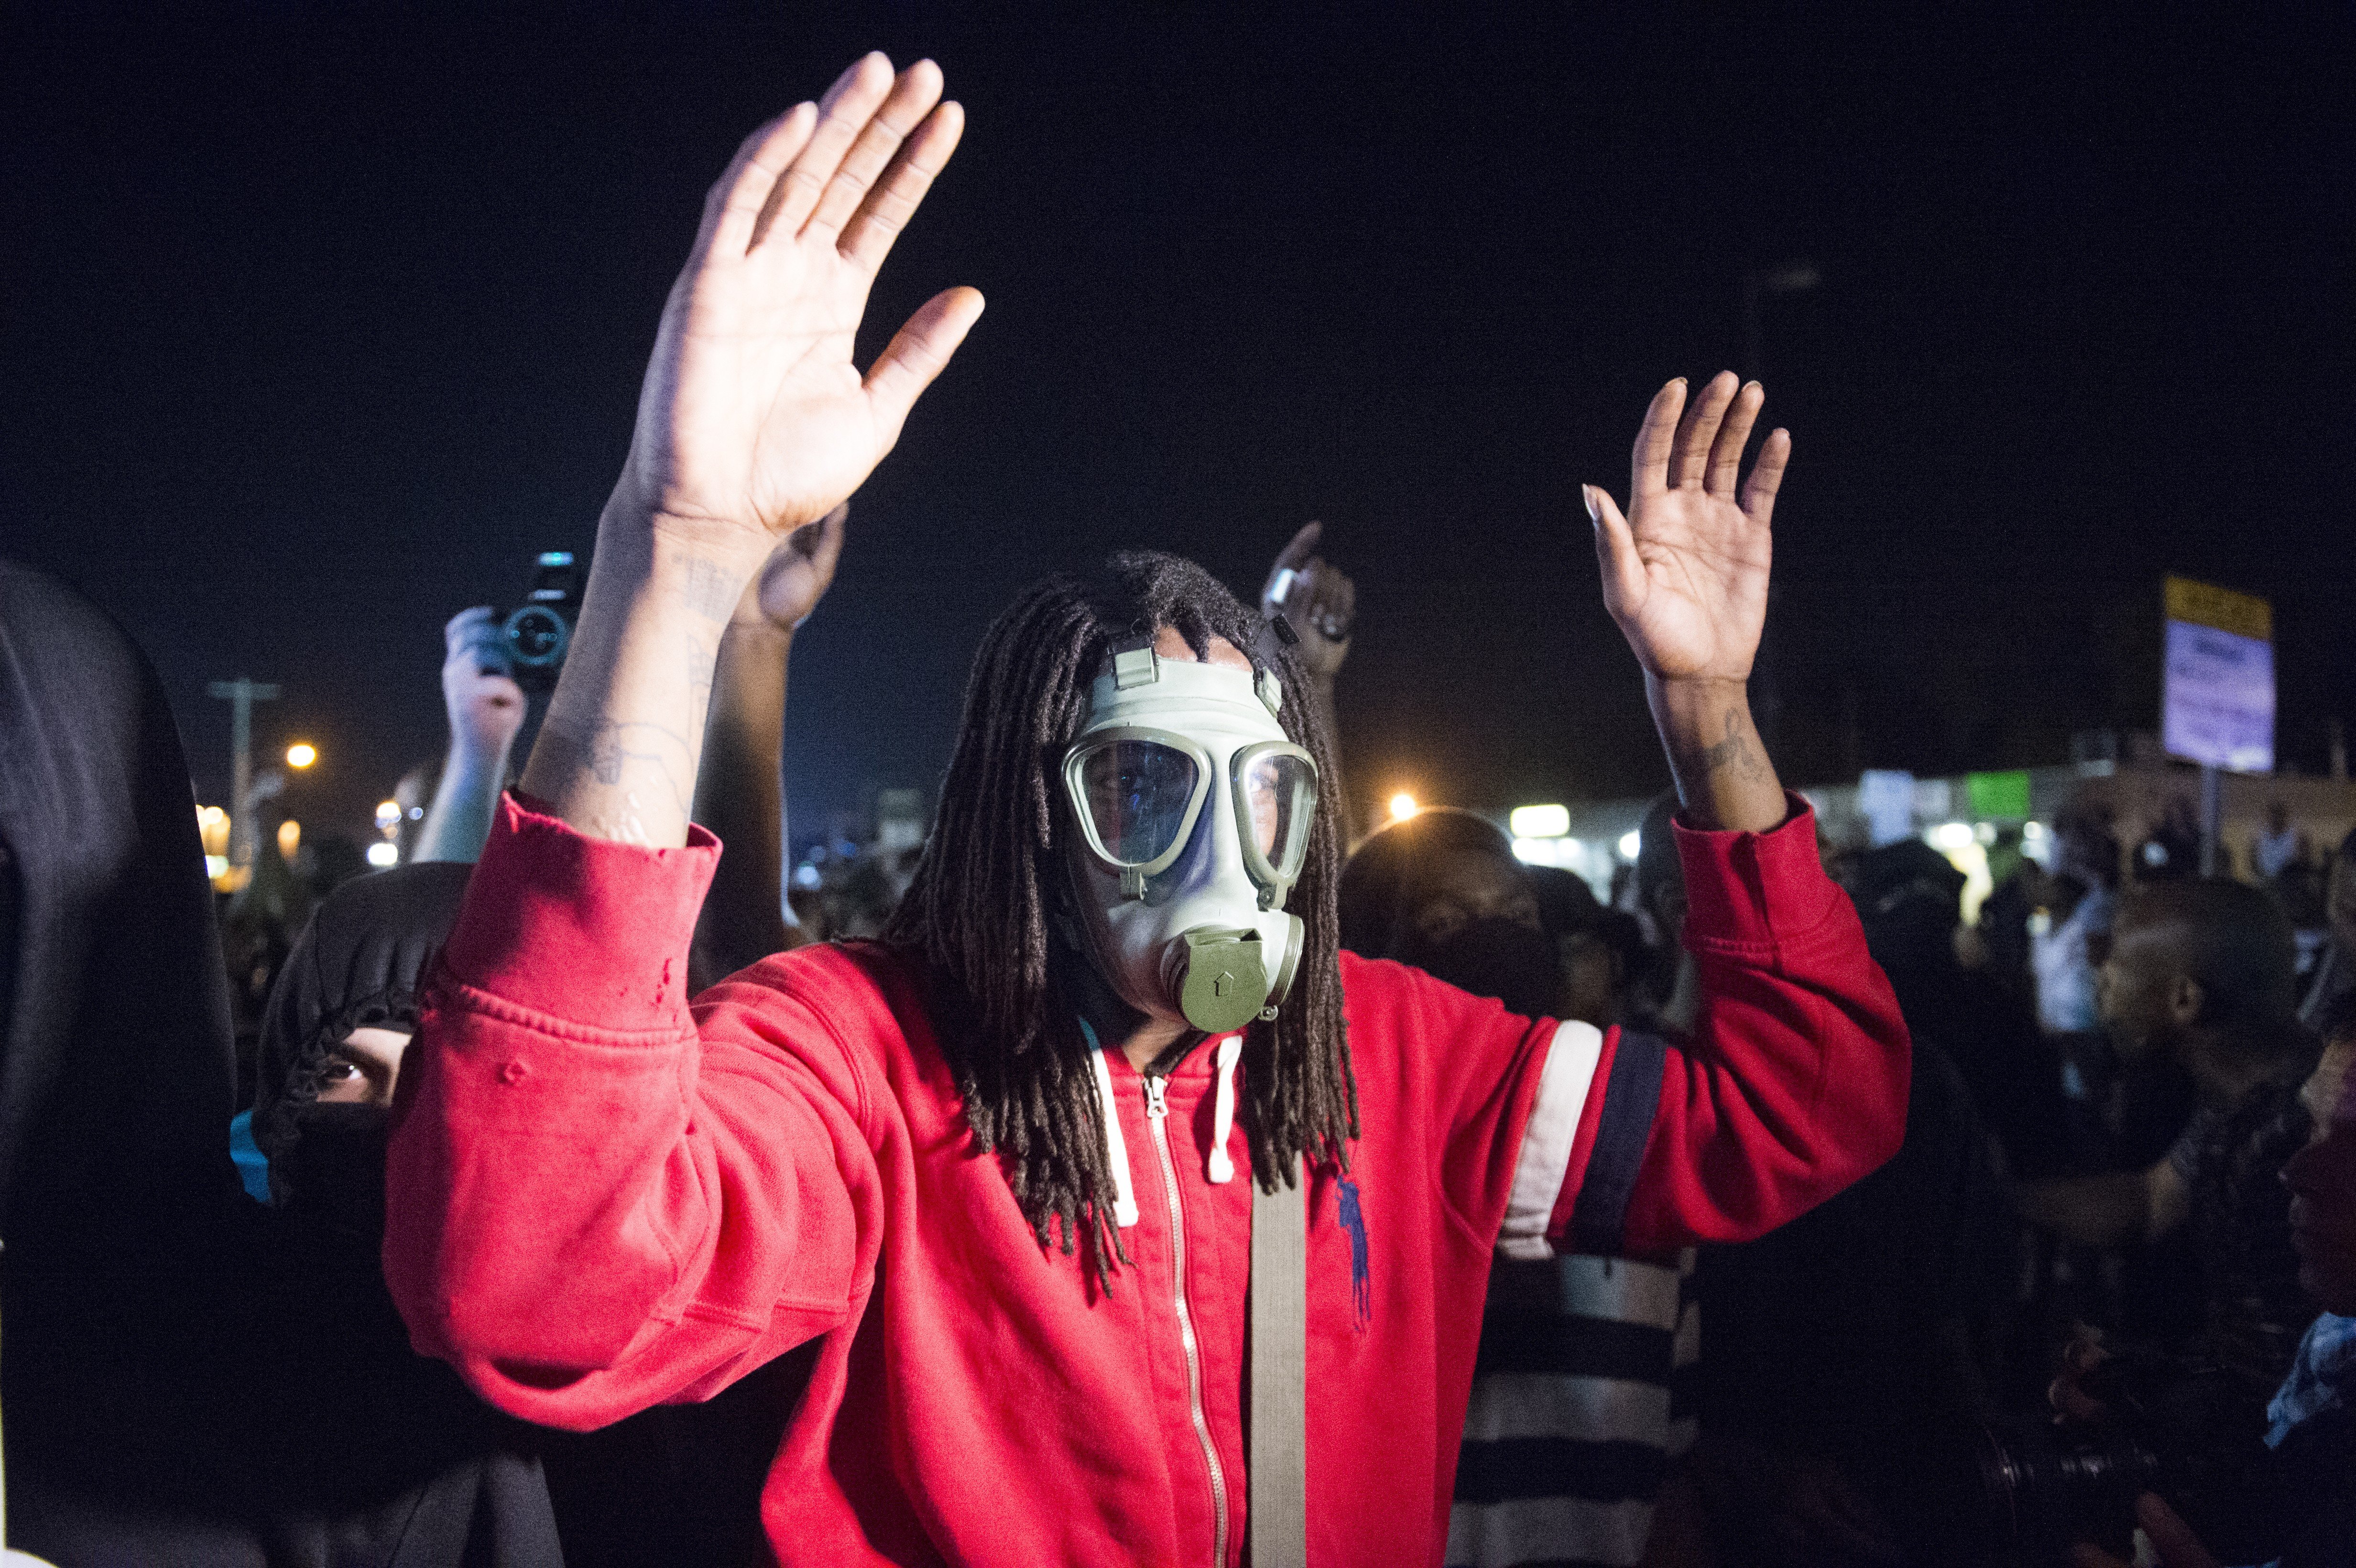 A protestor wearing a gas mask stands with his hands up while facing armed police in Ferguson, Mo. on Aug. 18, 2014.